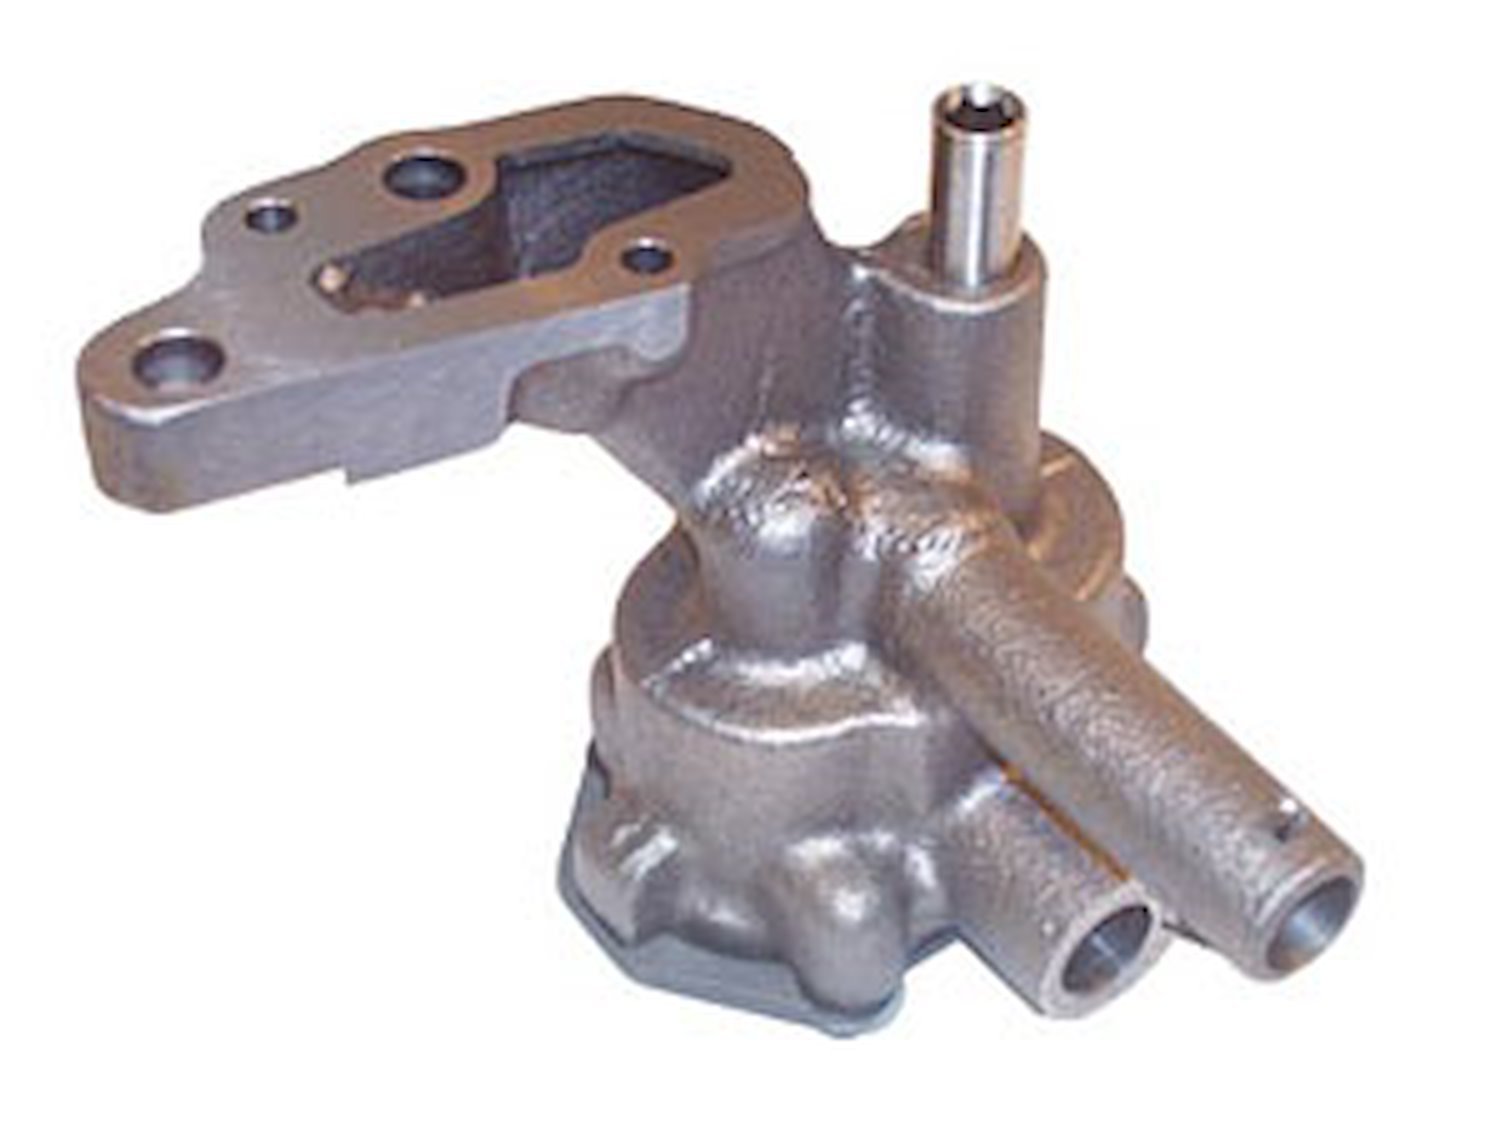 Oil Pump Fits Select 1978-1985 GM Models with 4.3L, 5.7L Engines